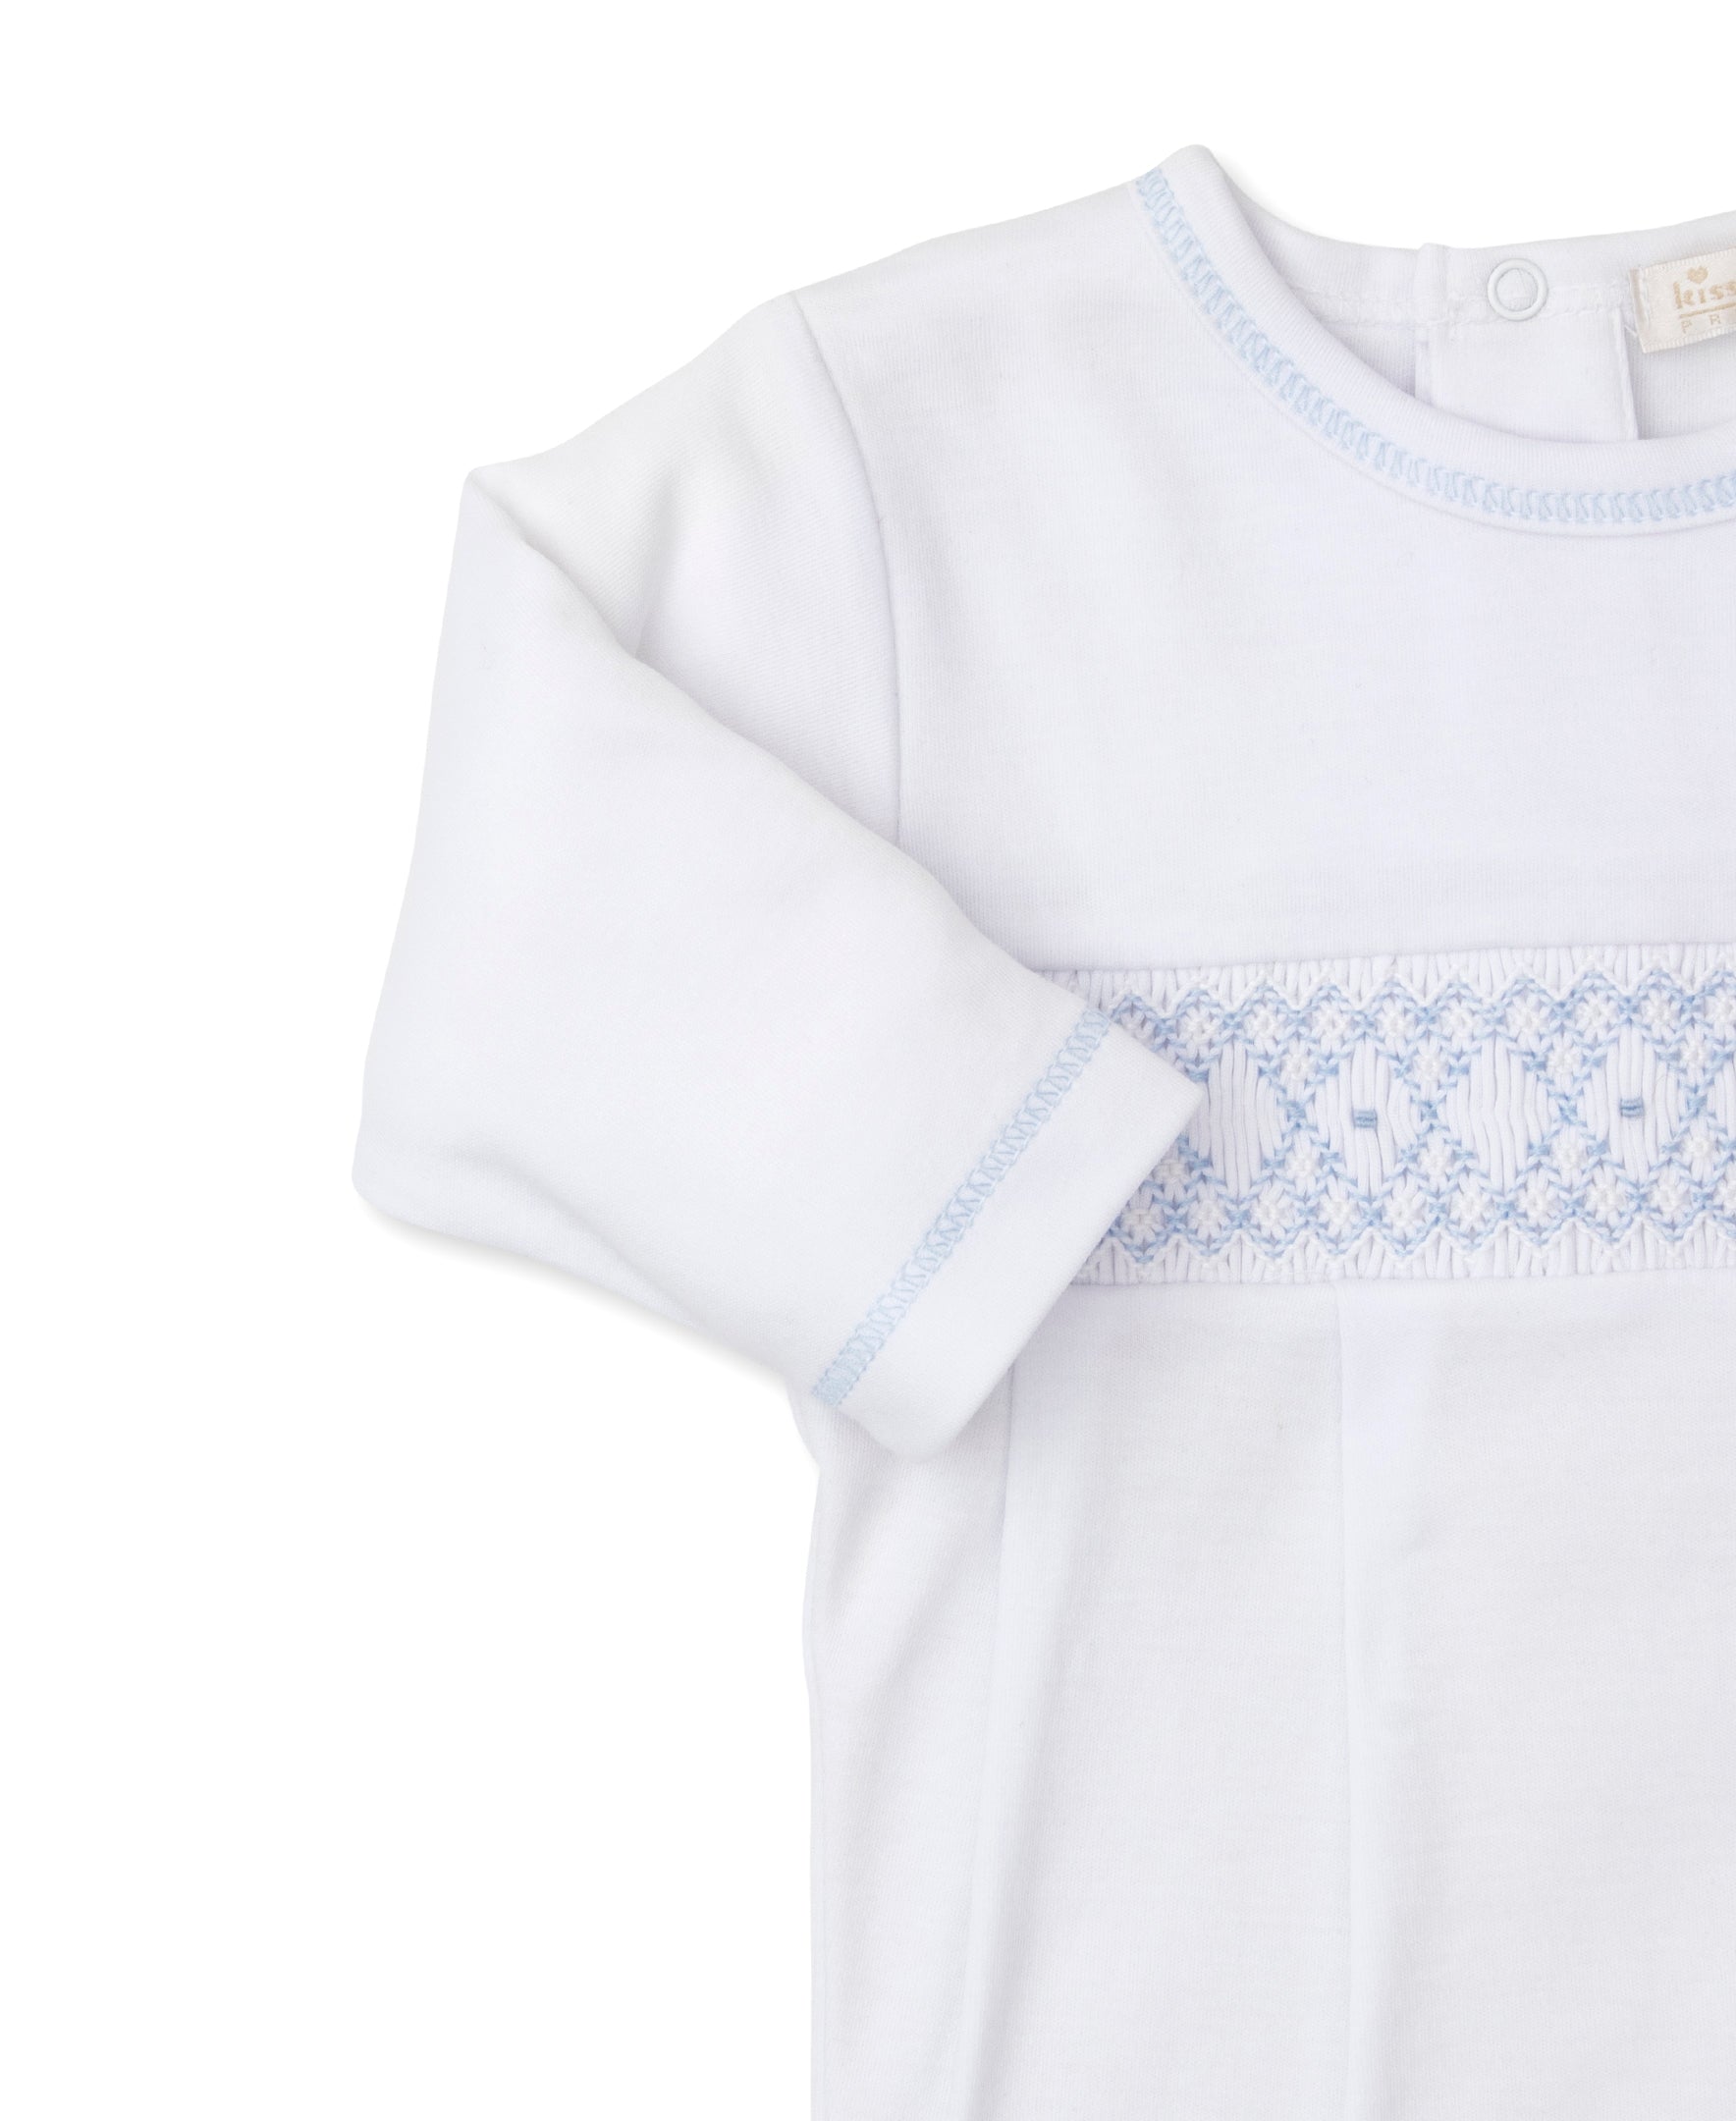 CLB Summer 24 White/Blue Hand Smocked Footie - Kissy Kissy